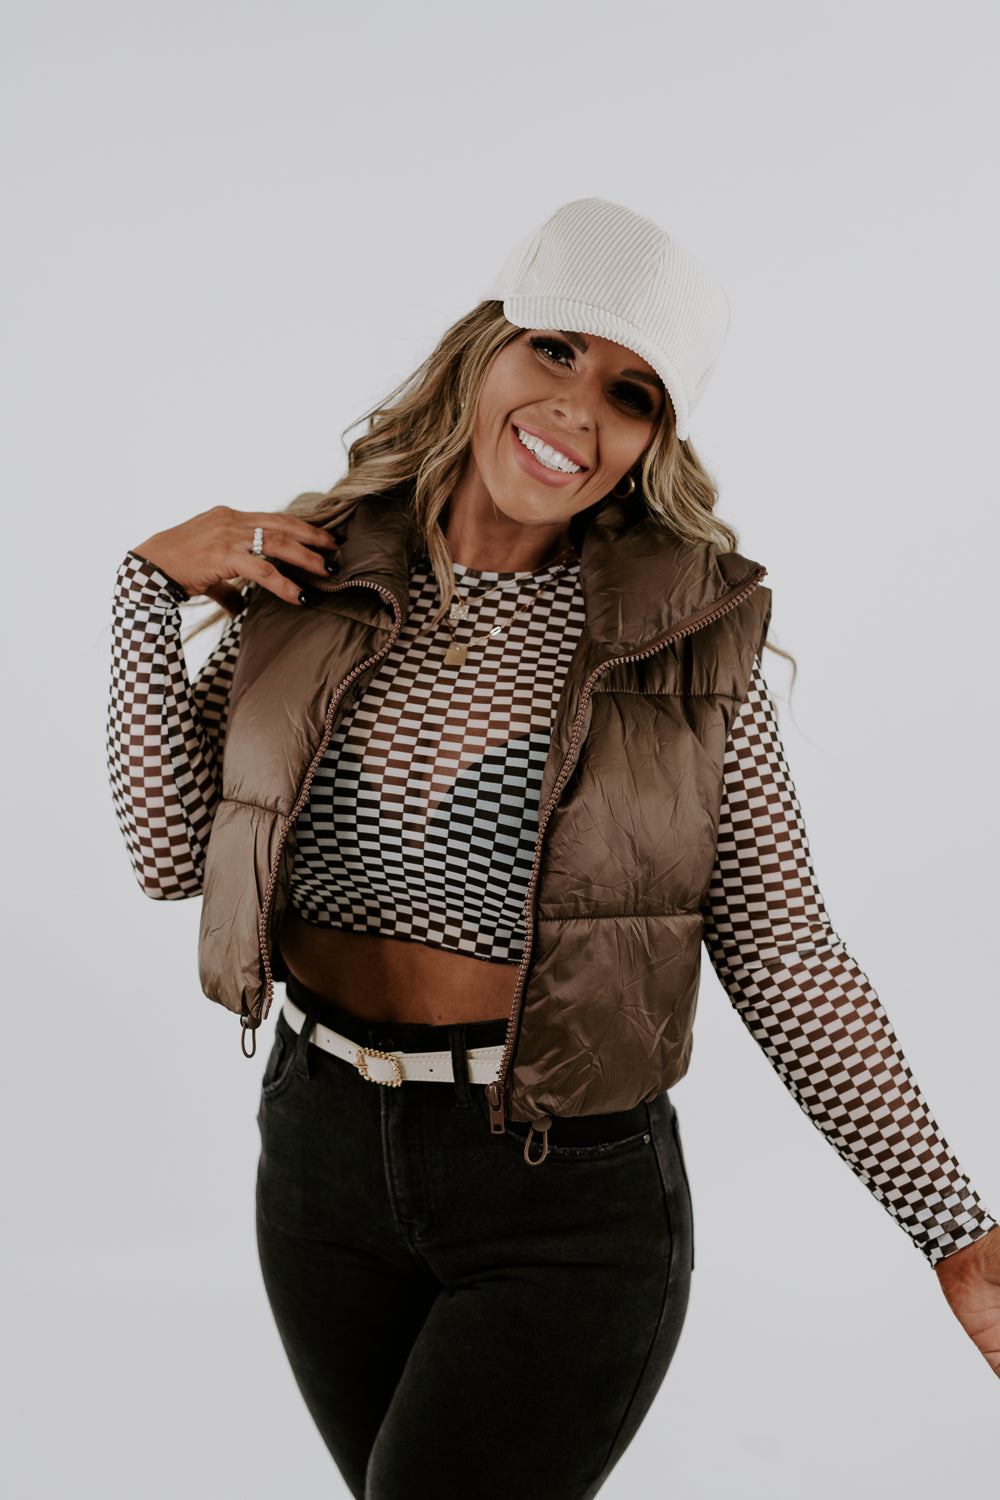 Eyes on You Taupe Brown Puffer Vest, Medium - The Mint Julep Boutique | Women's Boutique Clothing